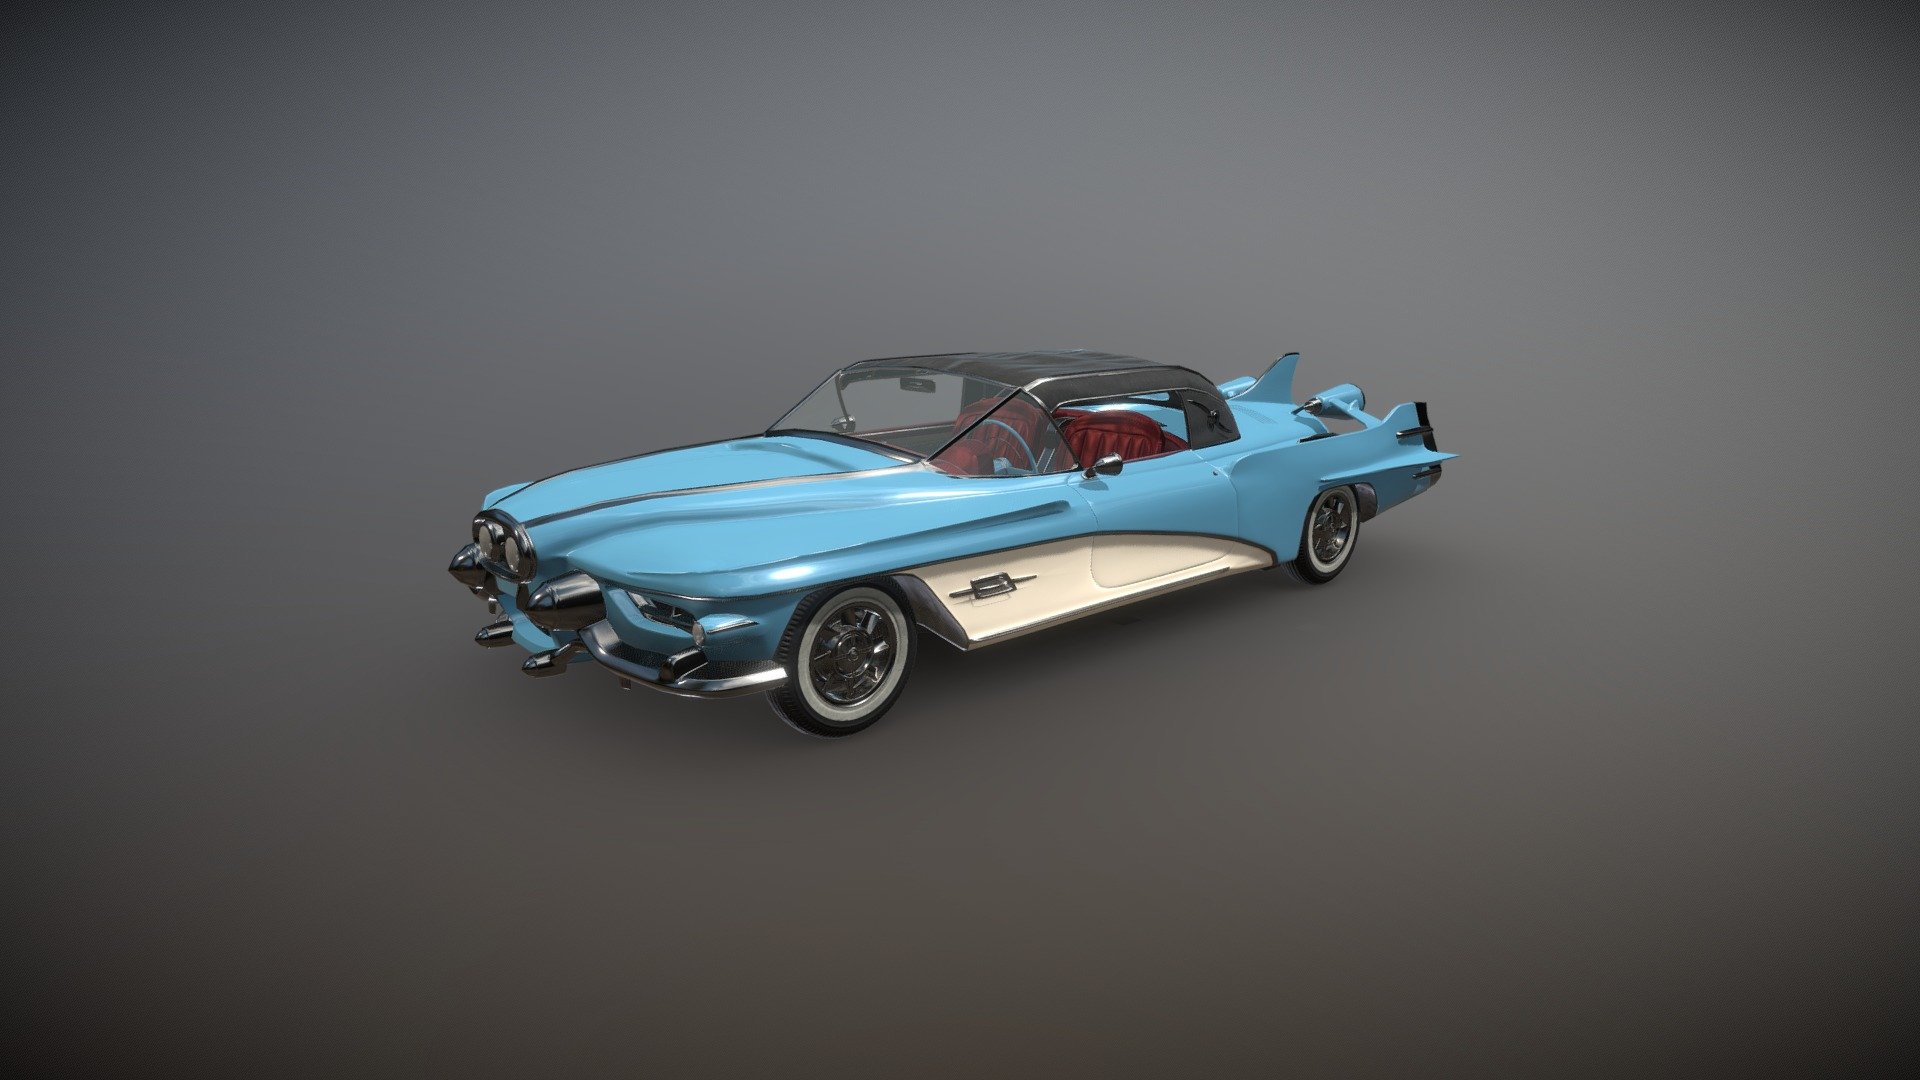 The Cutlass sports car is of Atom-Punk inspiration where Jet plane and Sports car blend into the highest of American class &amp; stylistic design, arriving anywhere in a Cutlass is going to make a statement.

This model has been created using a high-low poly construction method &amp; comes with a PBR Metallic / Roughness texture set. 

Originally created for modding purposes.

Doors are fully modelled &amp; do open, Convertible roof is removable.

See more of my artwork on my ArtStation:

(custom color combinations can be made on request)

https://www.artstation.com/edgeuk90

Notice: Incorrect download / ripping of this content will result in a DMCA being filed against you 3d model